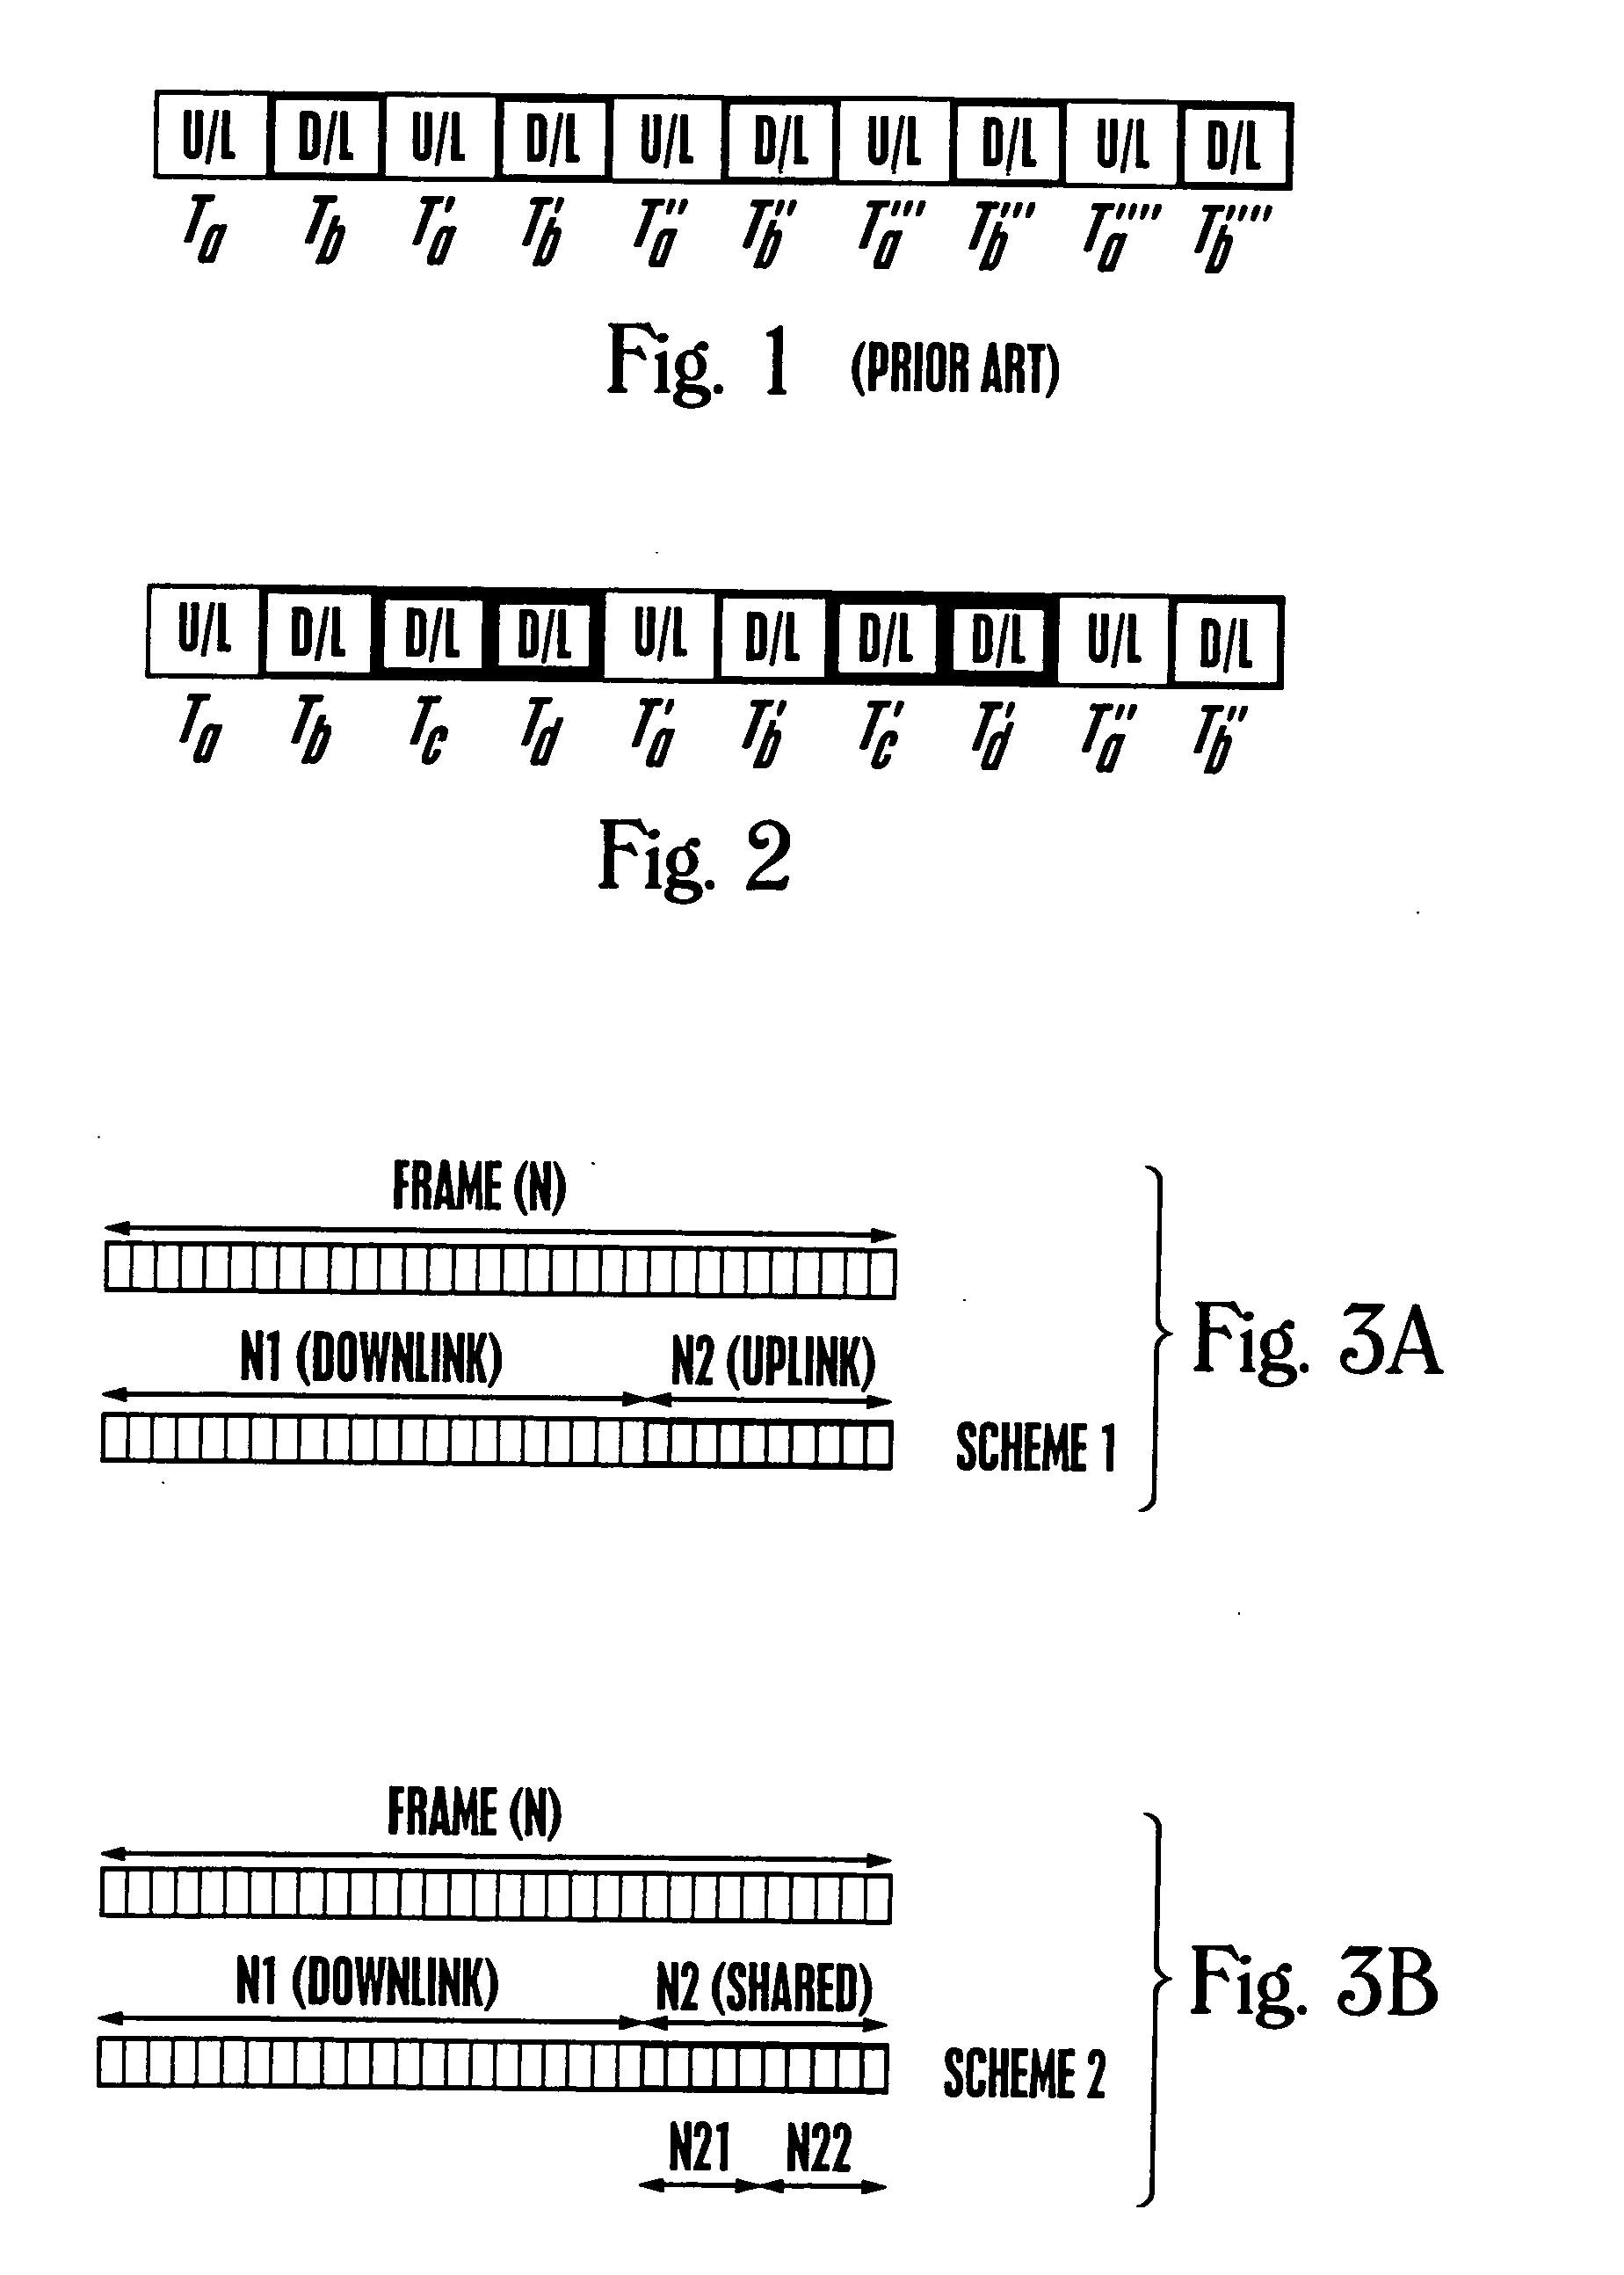 Adaptive time division duplexing method and apparatus for dynamic bandwidth allocation within a wireless communication system